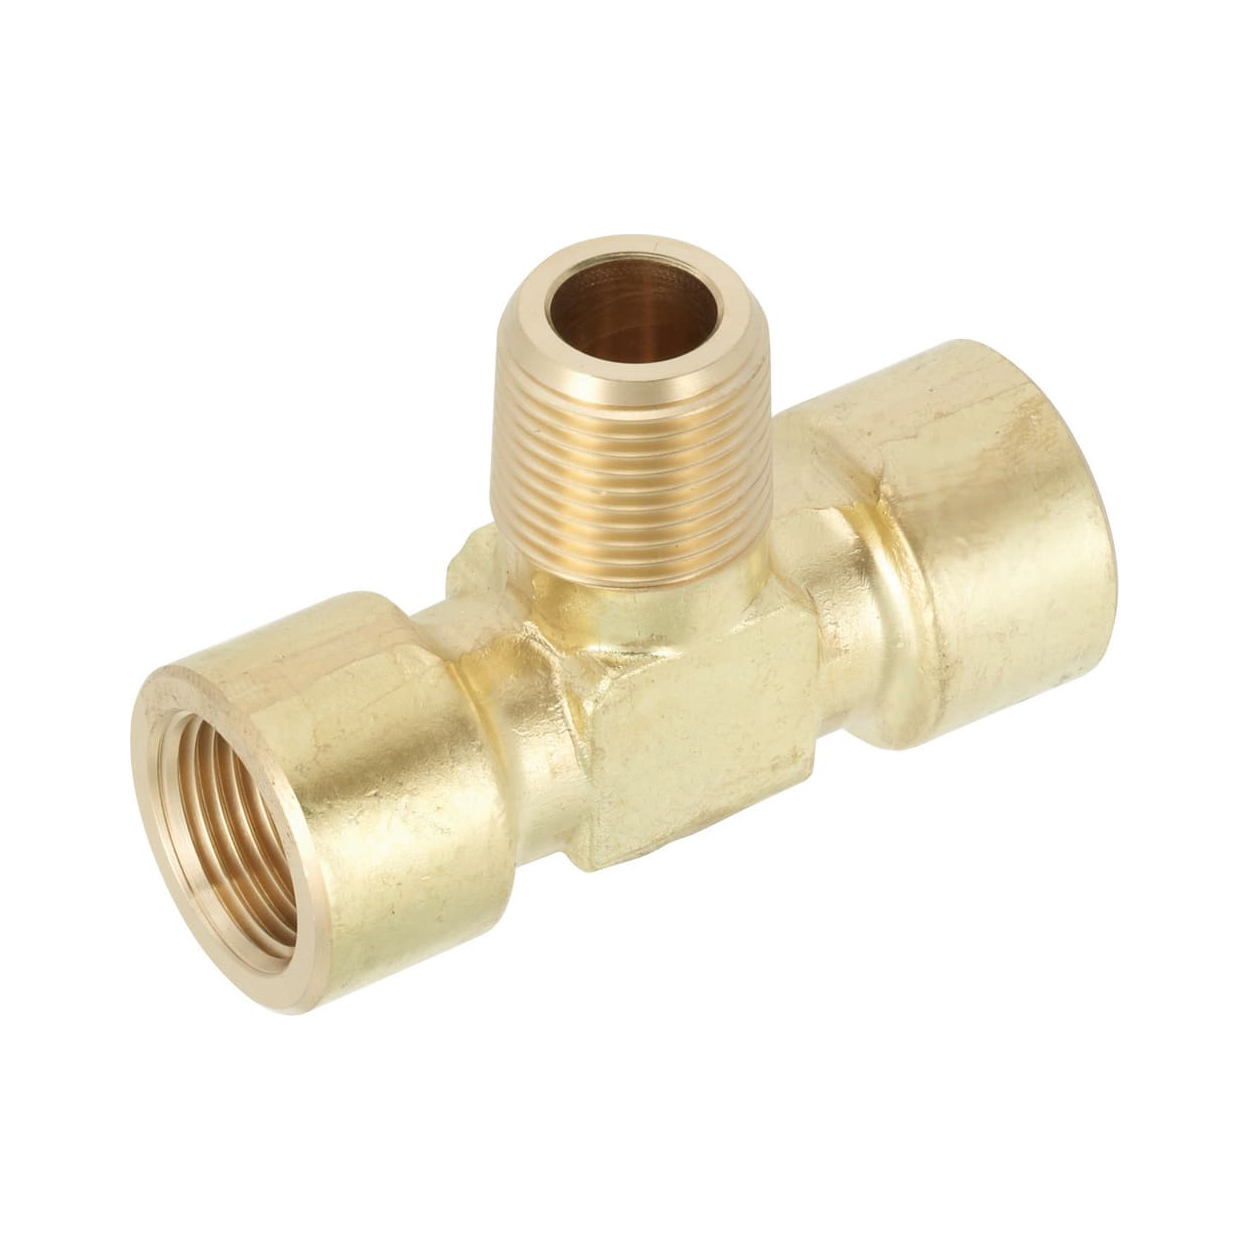 Brass Fittings for Steel Pipe / Tee / Threaded / Tapped